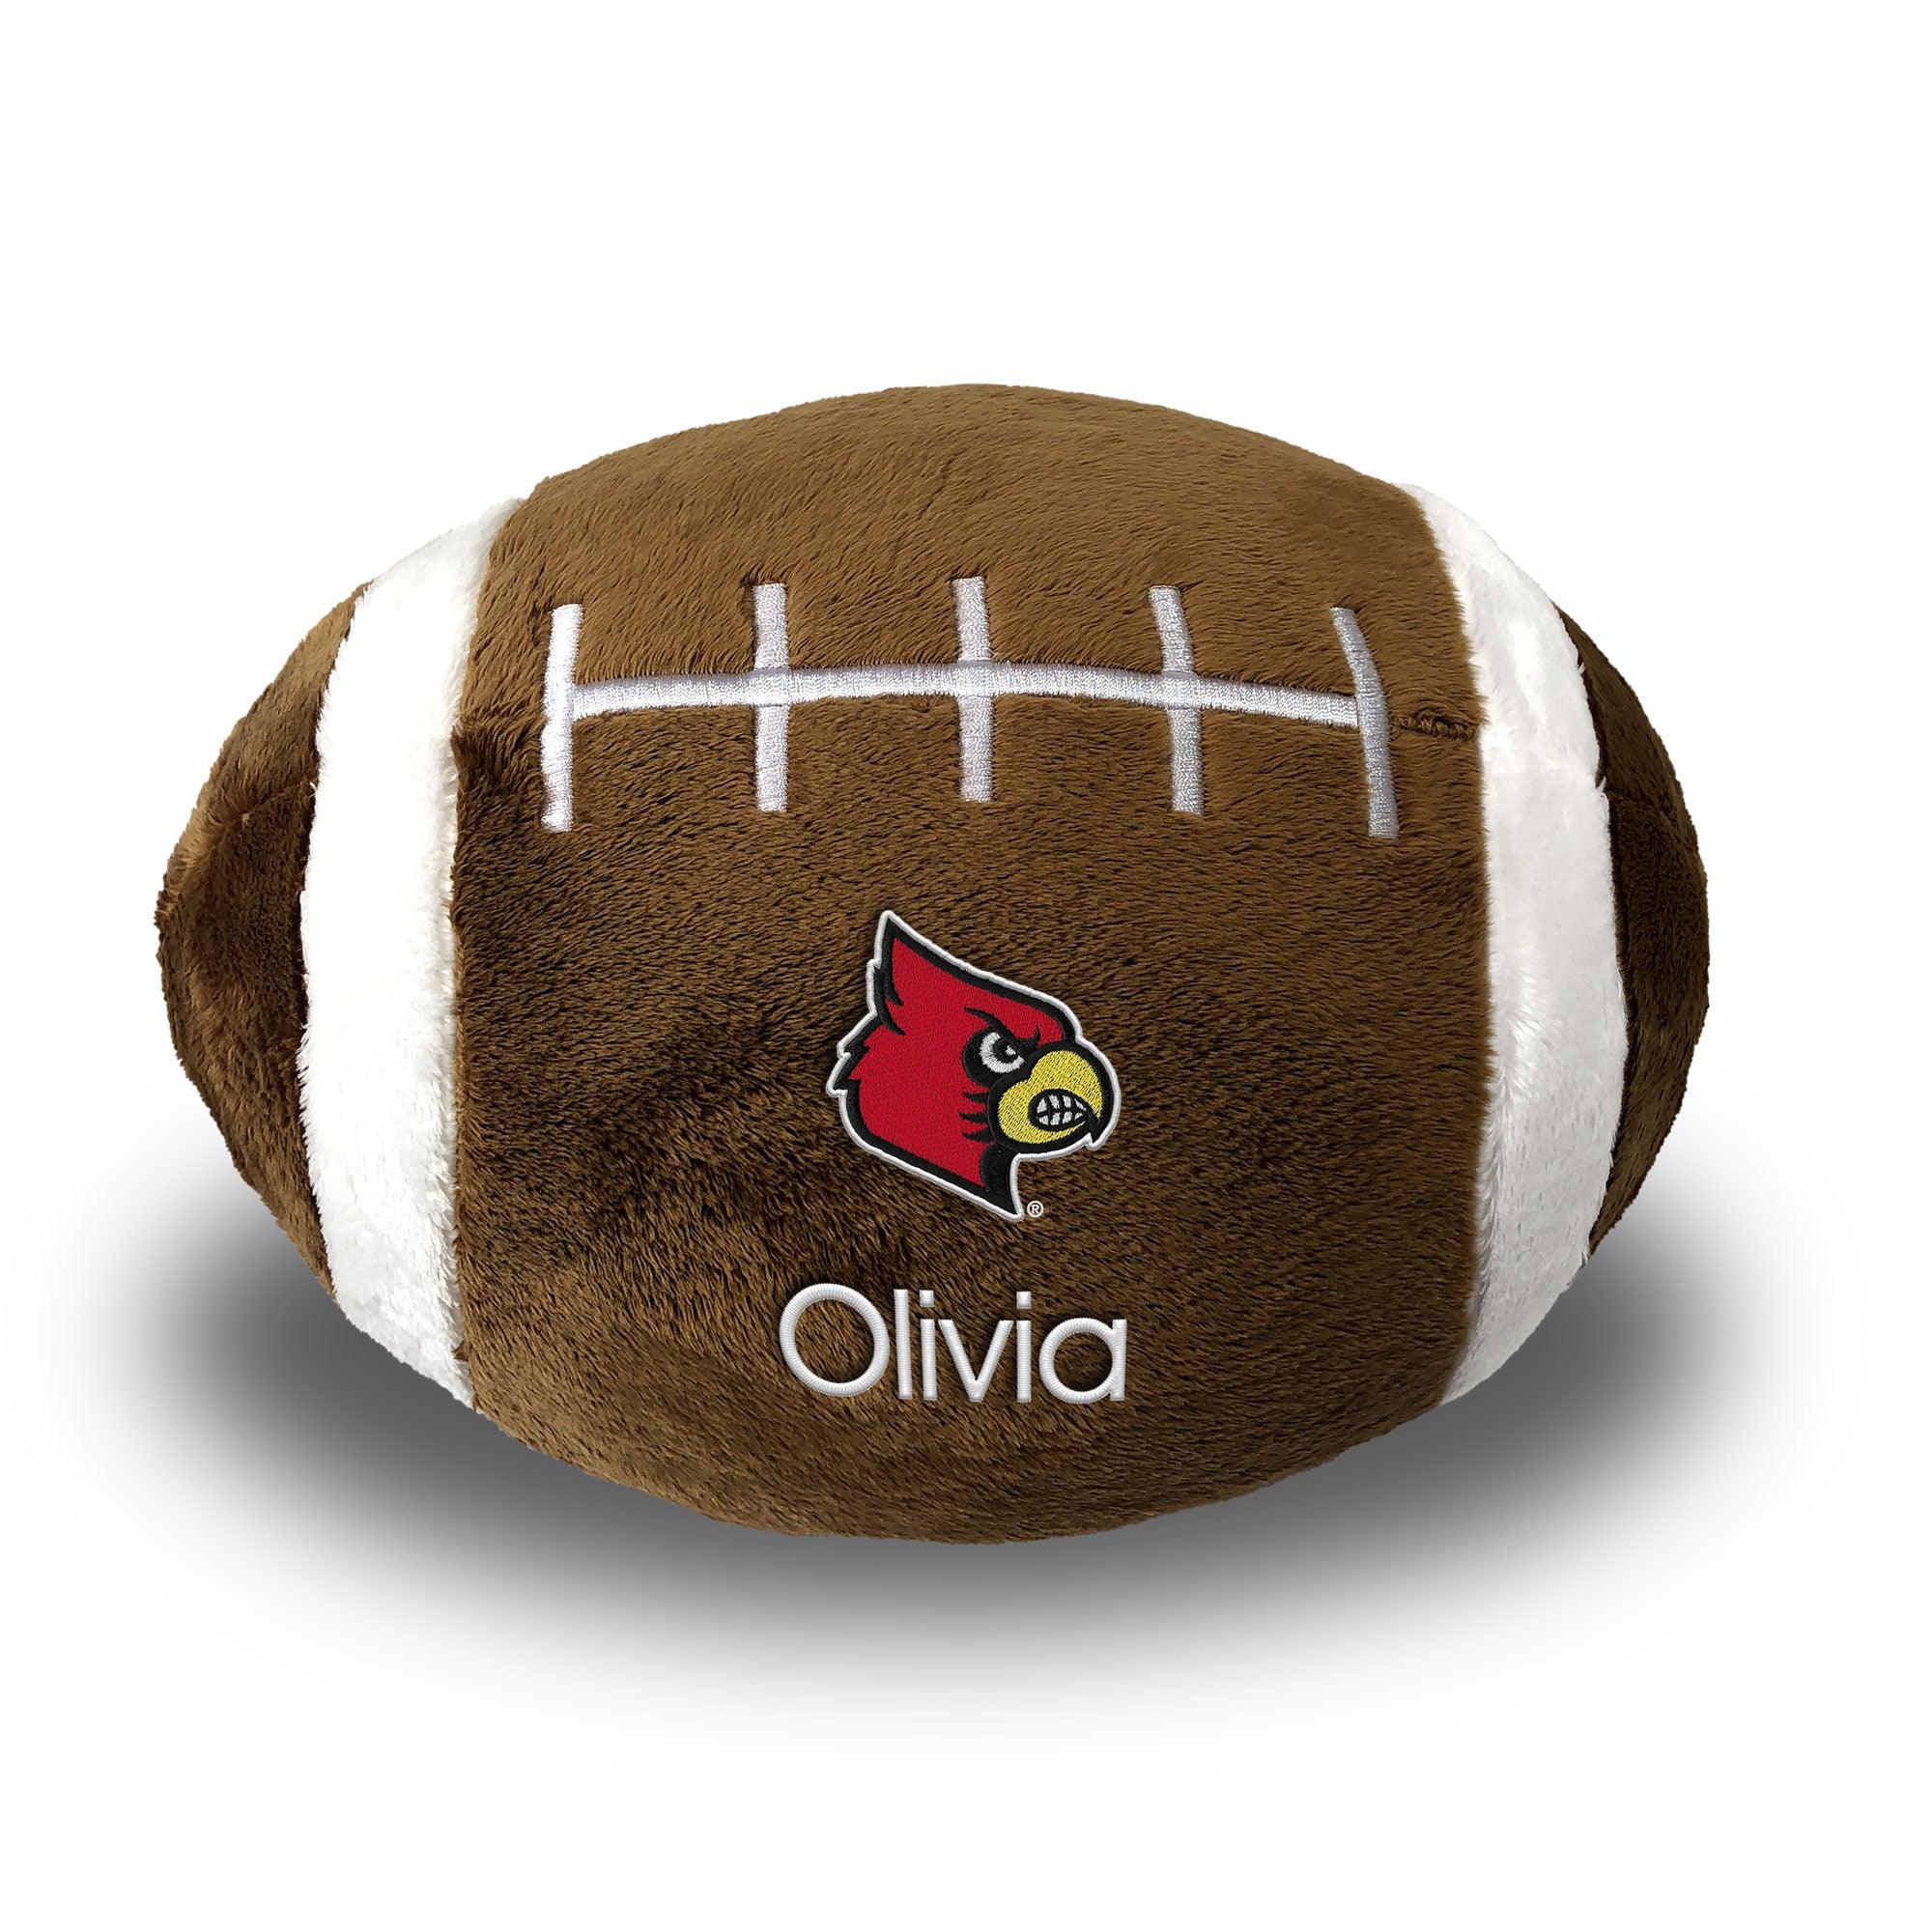 Personalized Louisville Cardinals Plush Football – Designs by Chad & Jake